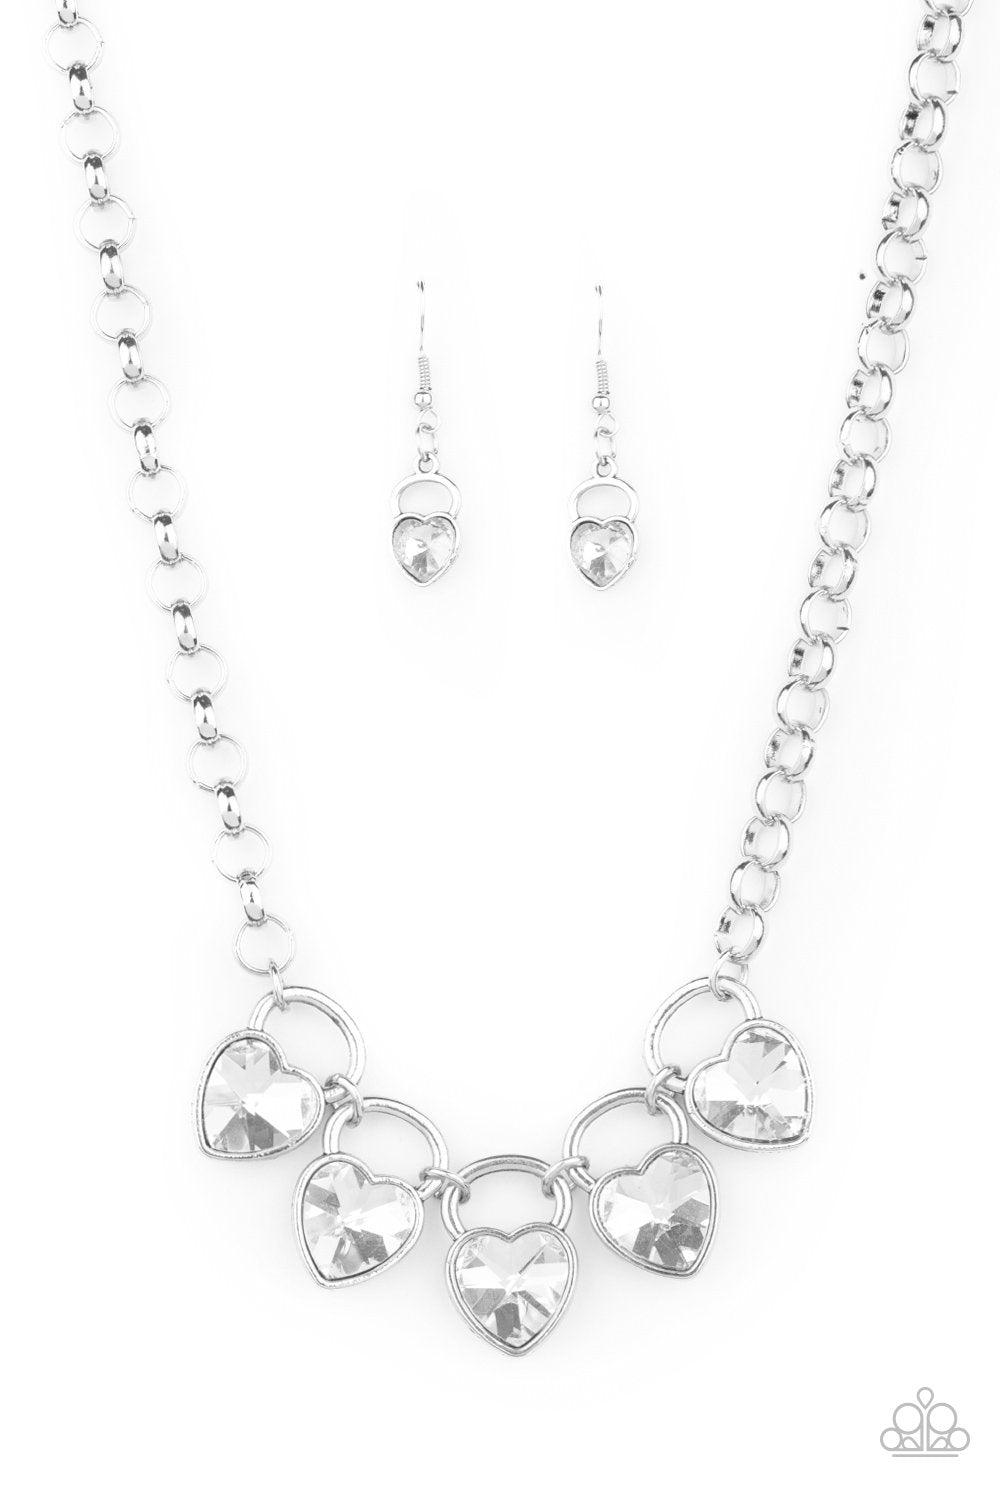 HEART On Your Heels White Rhinestone Heart Necklace - Paparazzi Accessories LOTP Exclusive January 2021 - lightbox -CarasShop.com - $5 Jewelry by Cara Jewels